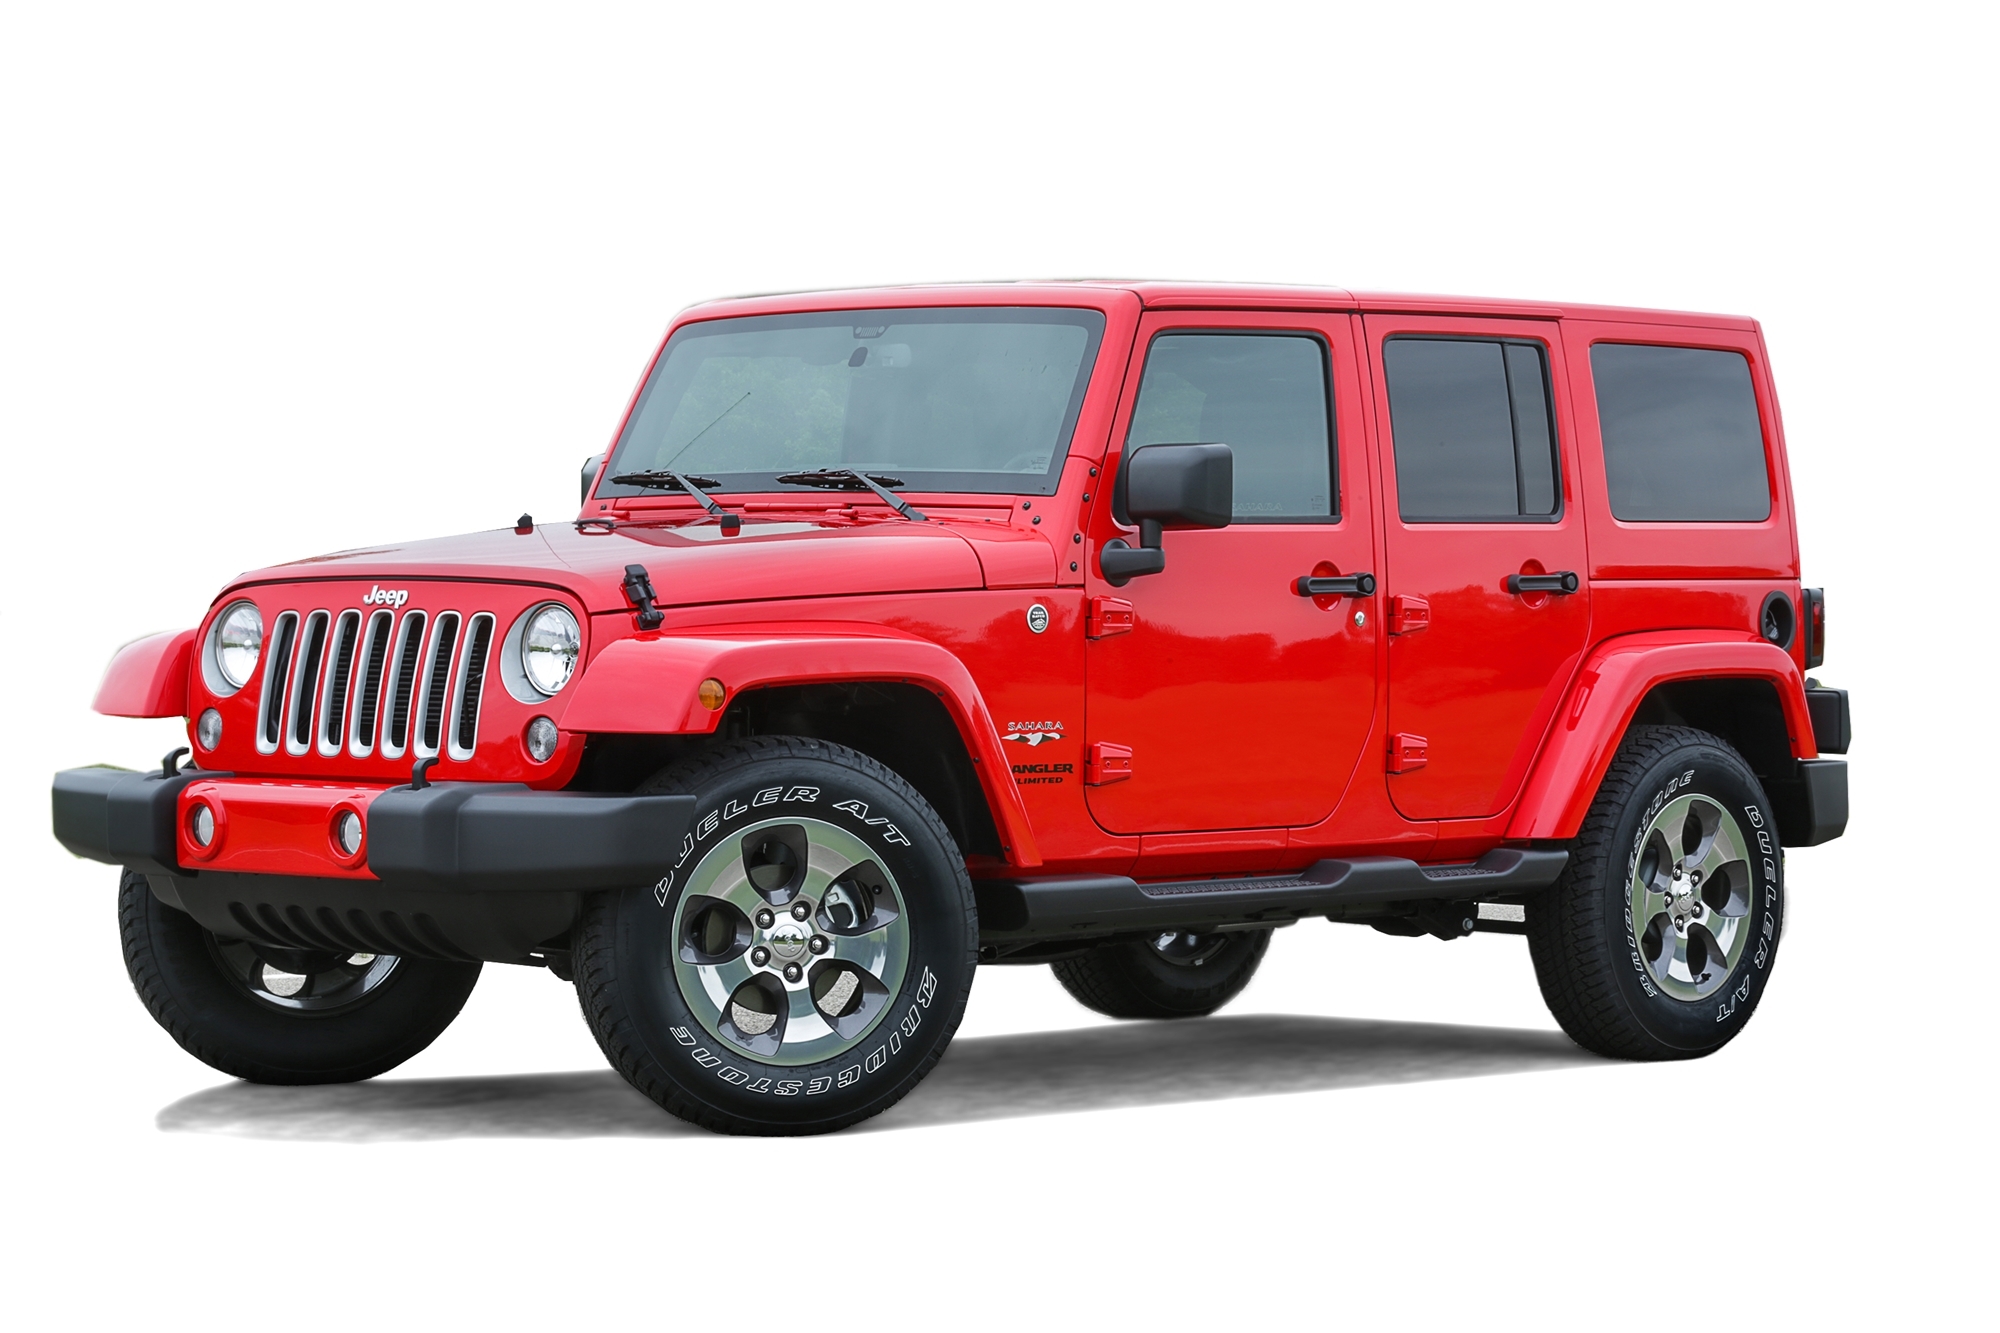 2014 Jeep Wrangler Unlimited Sahara Full Specs, Features and Price | CarBuzz